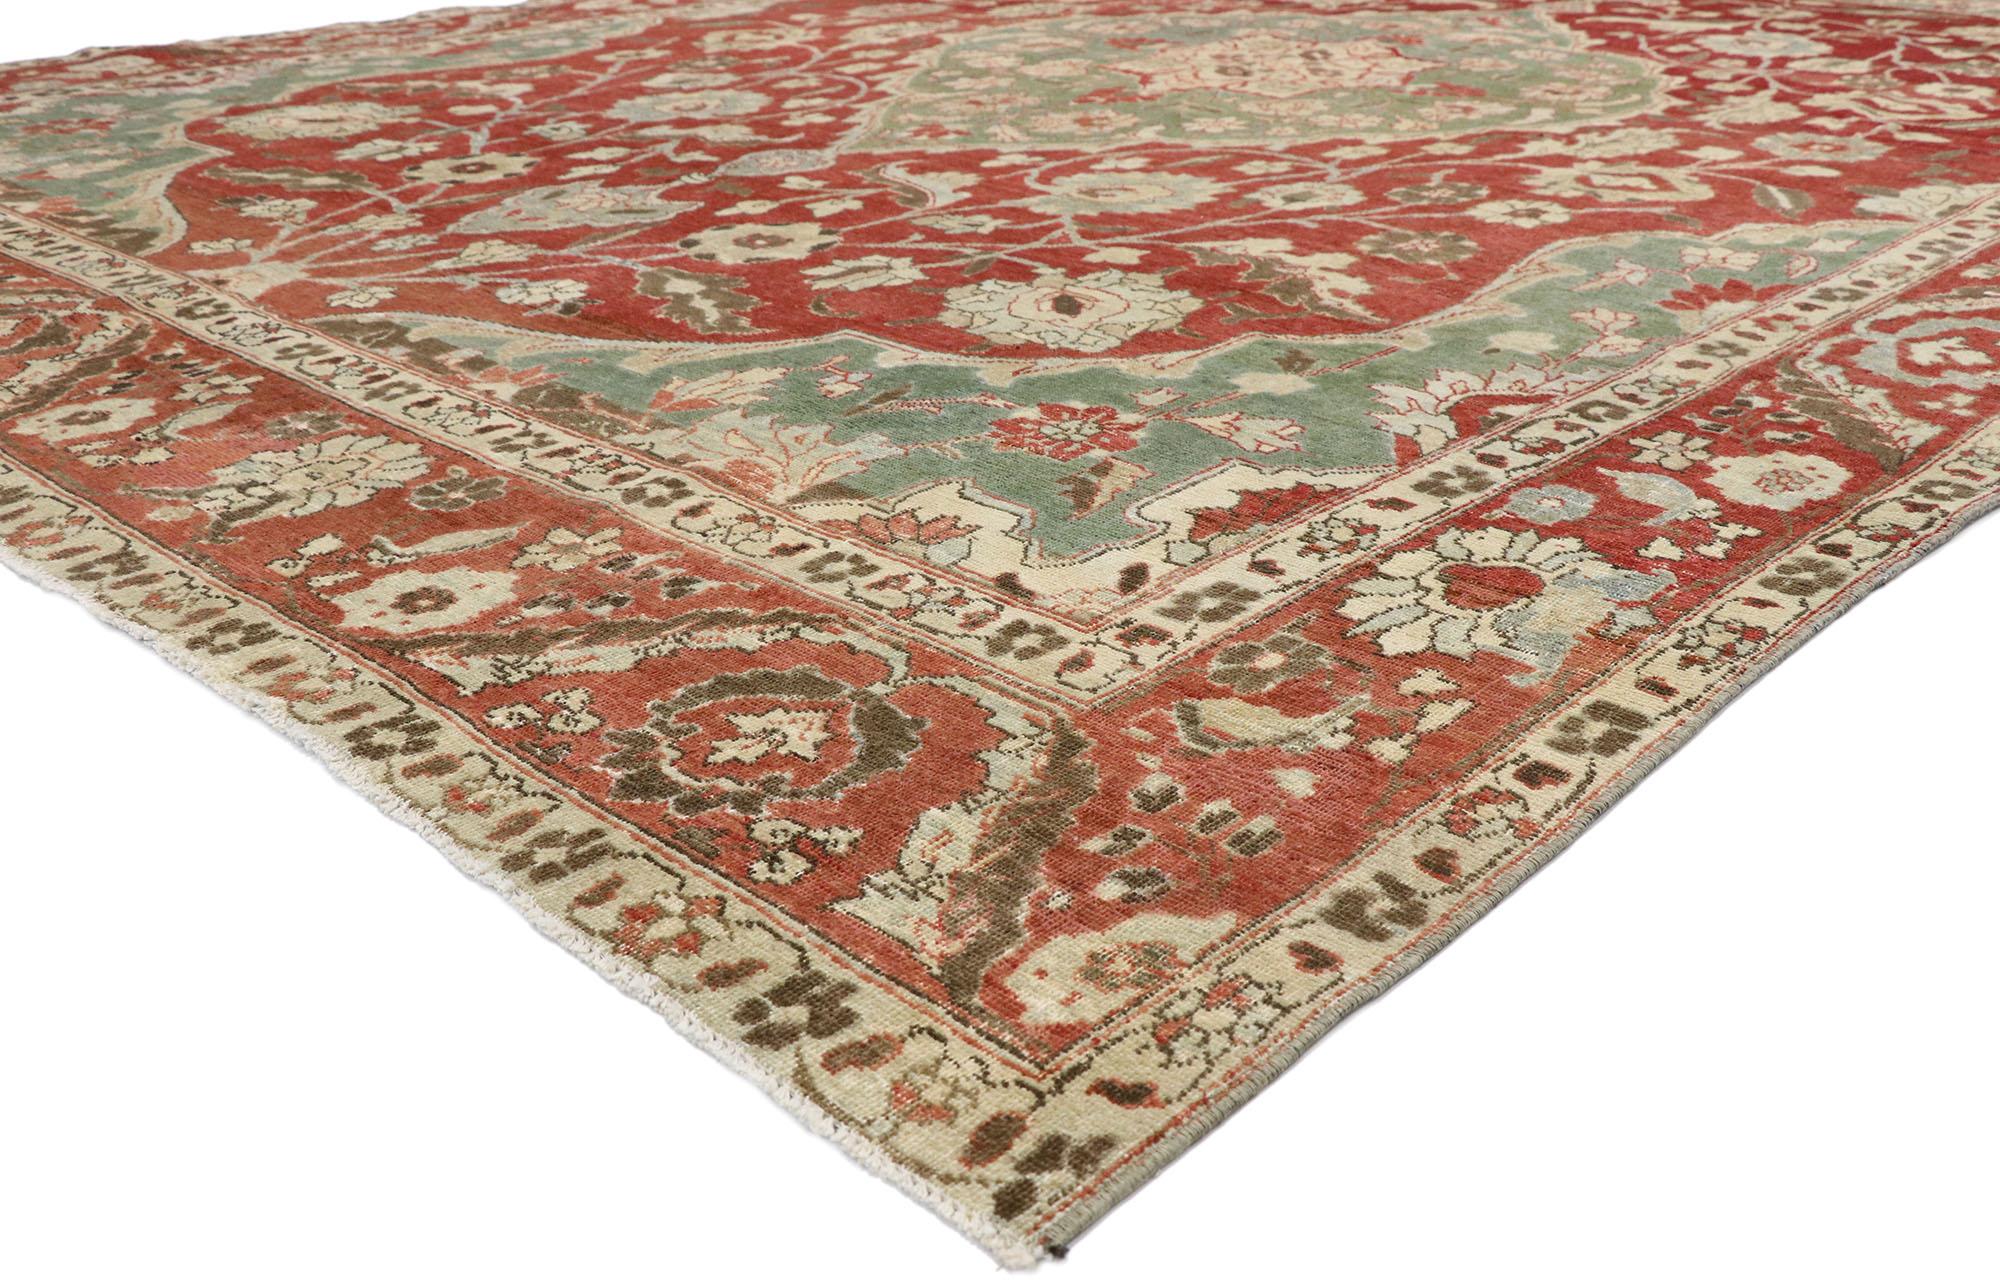 52679, Distressed Antique Persian Mahal Design Rug with English Manor Chintz Style. With a Classic floral pattern and traditional feel, this hand knotted wool distressed antique Persian Mahal design rug beautifully embodies English Chintz style.